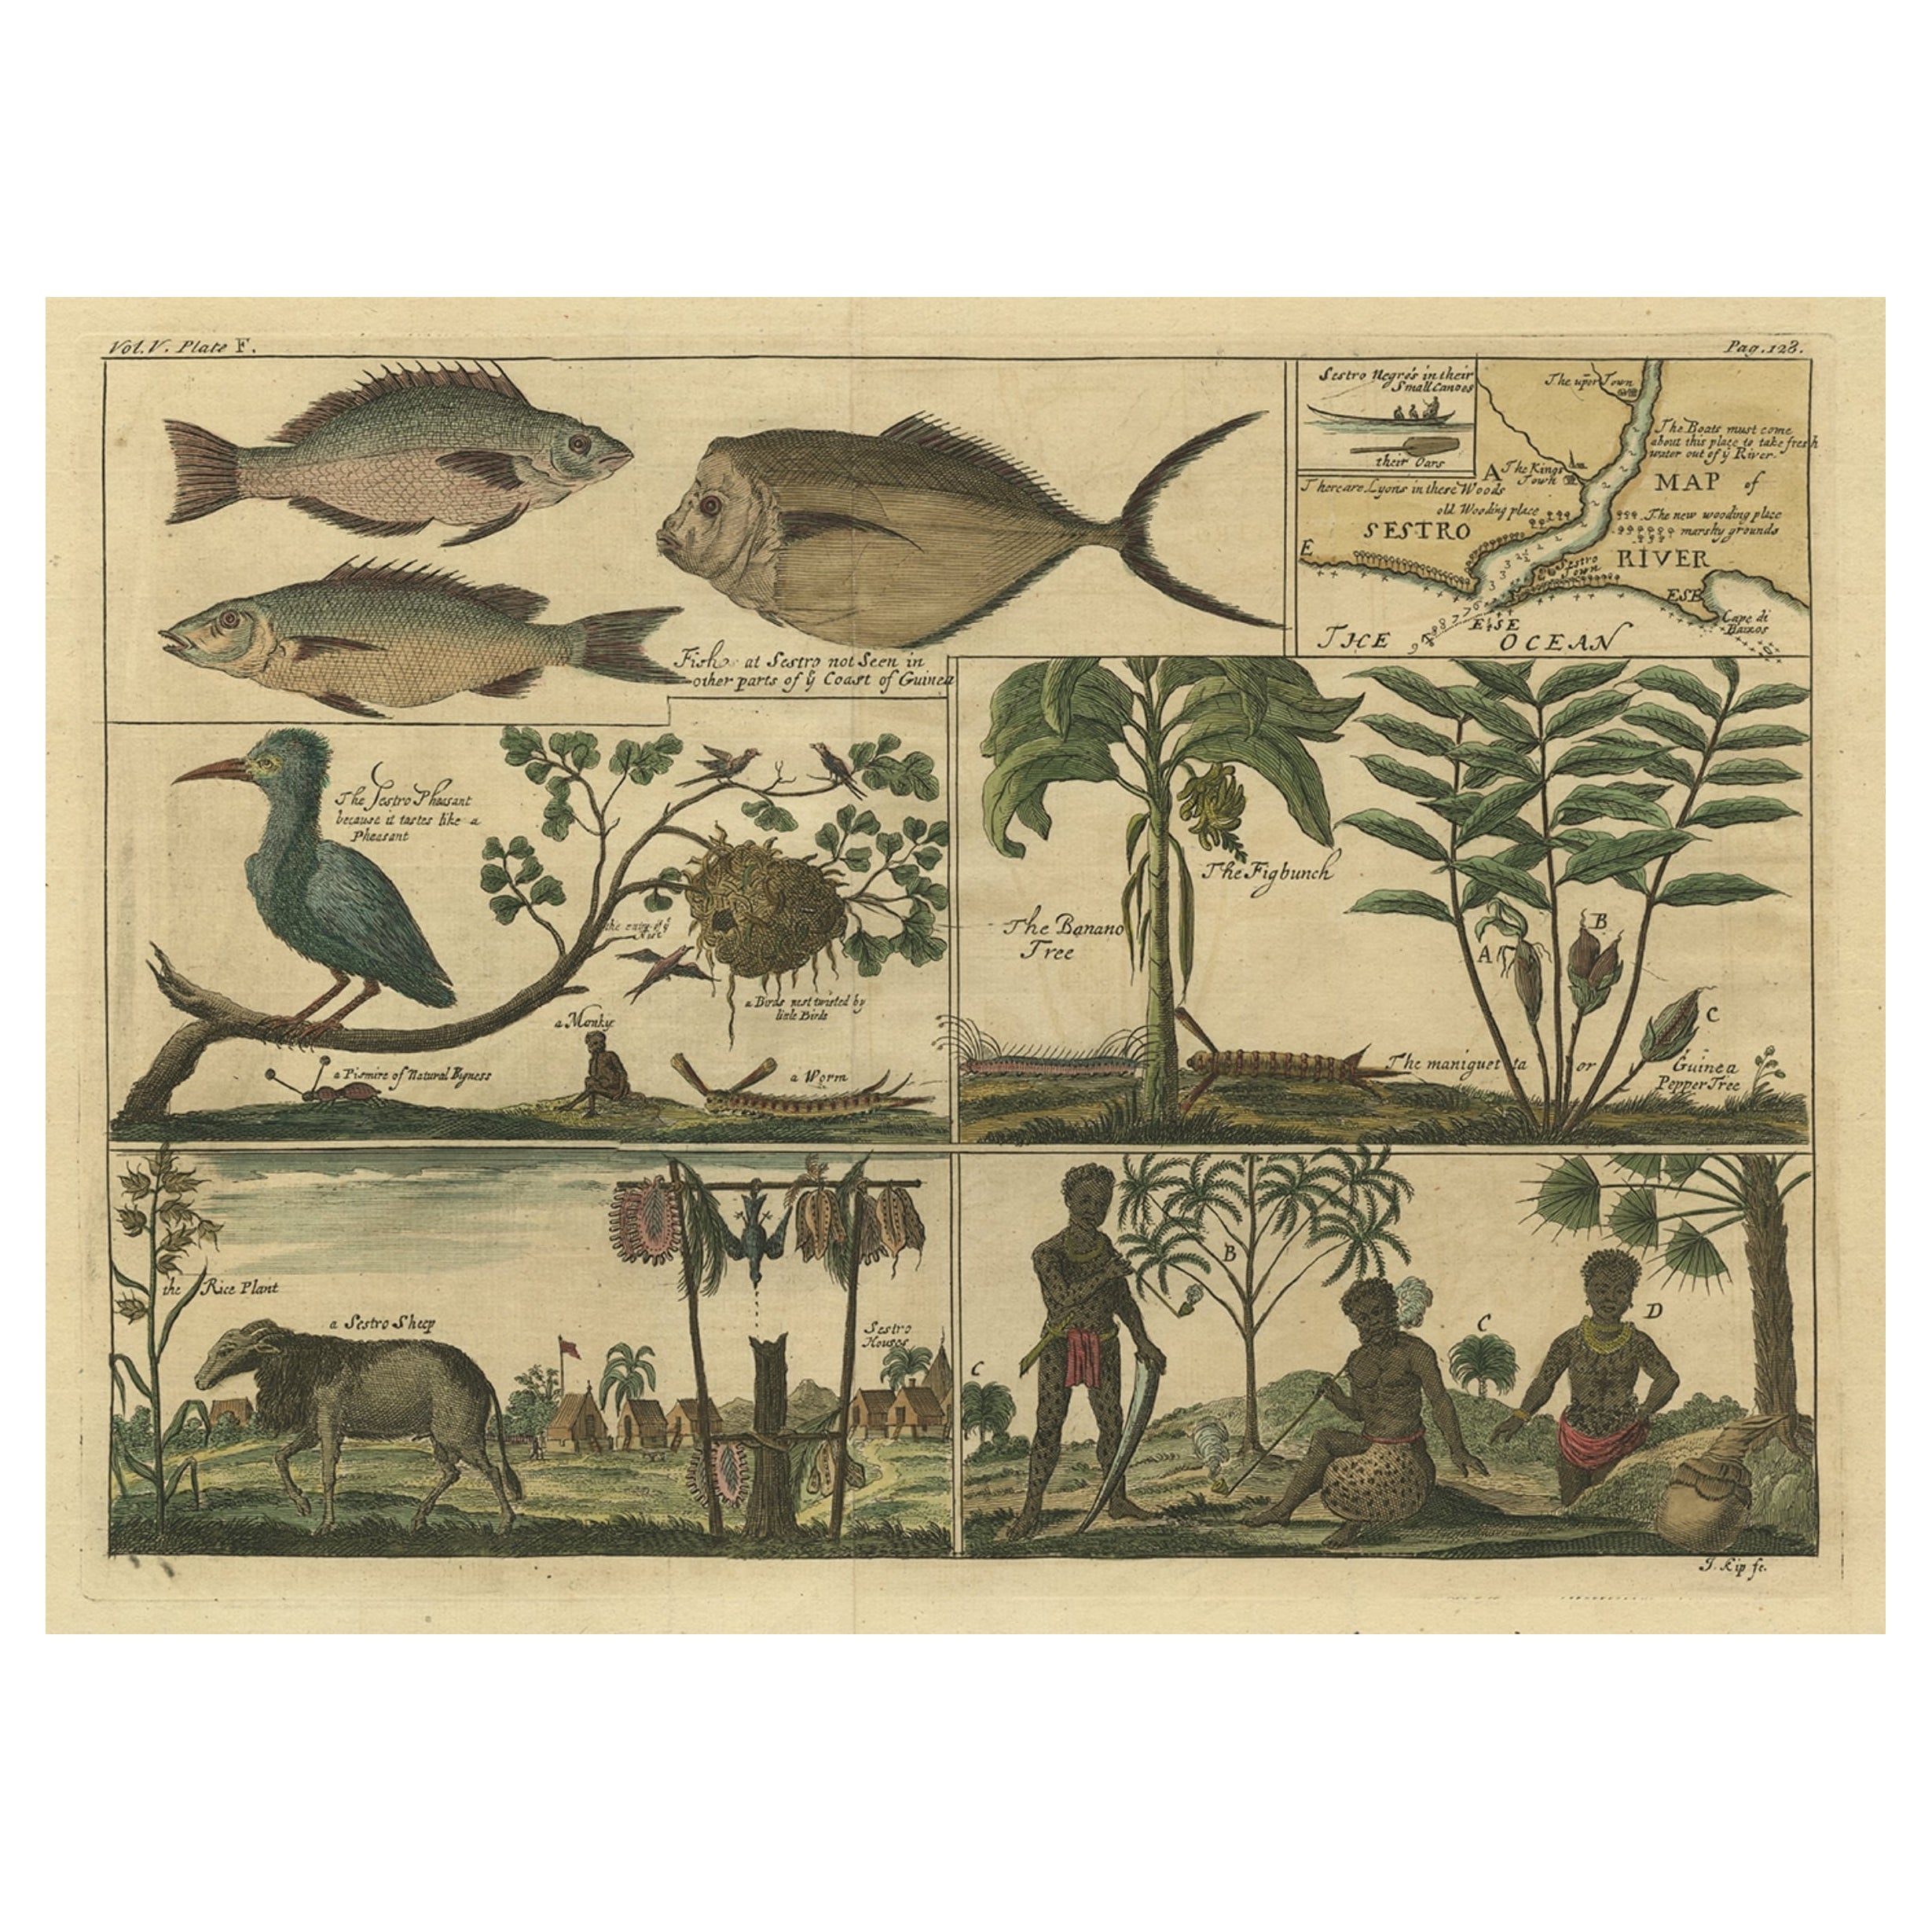 Rare Antique Engraving of Life Near The Sestro River, Liberia in Africa, 1744 For Sale